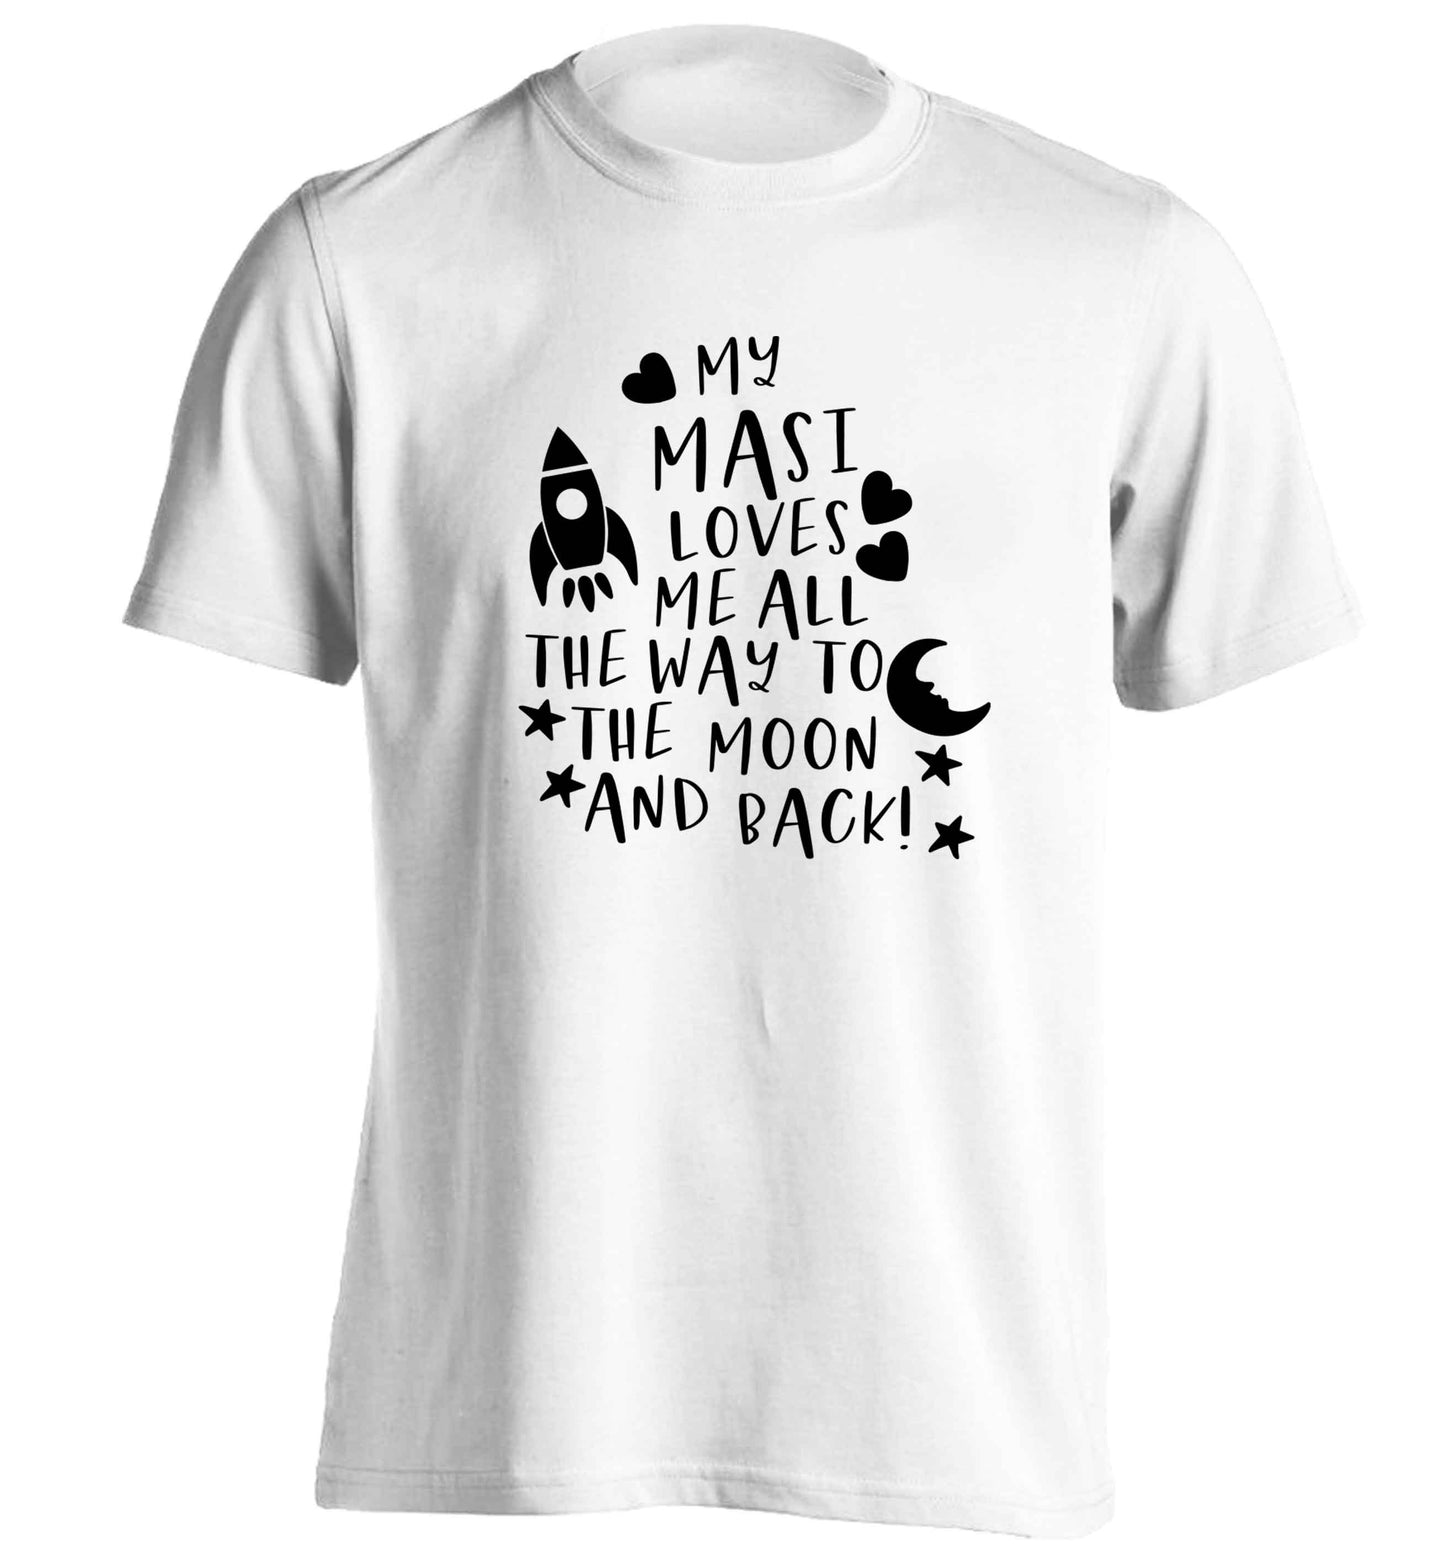 My masi loves me all the way to the moon and back adults unisex white Tshirt 2XL